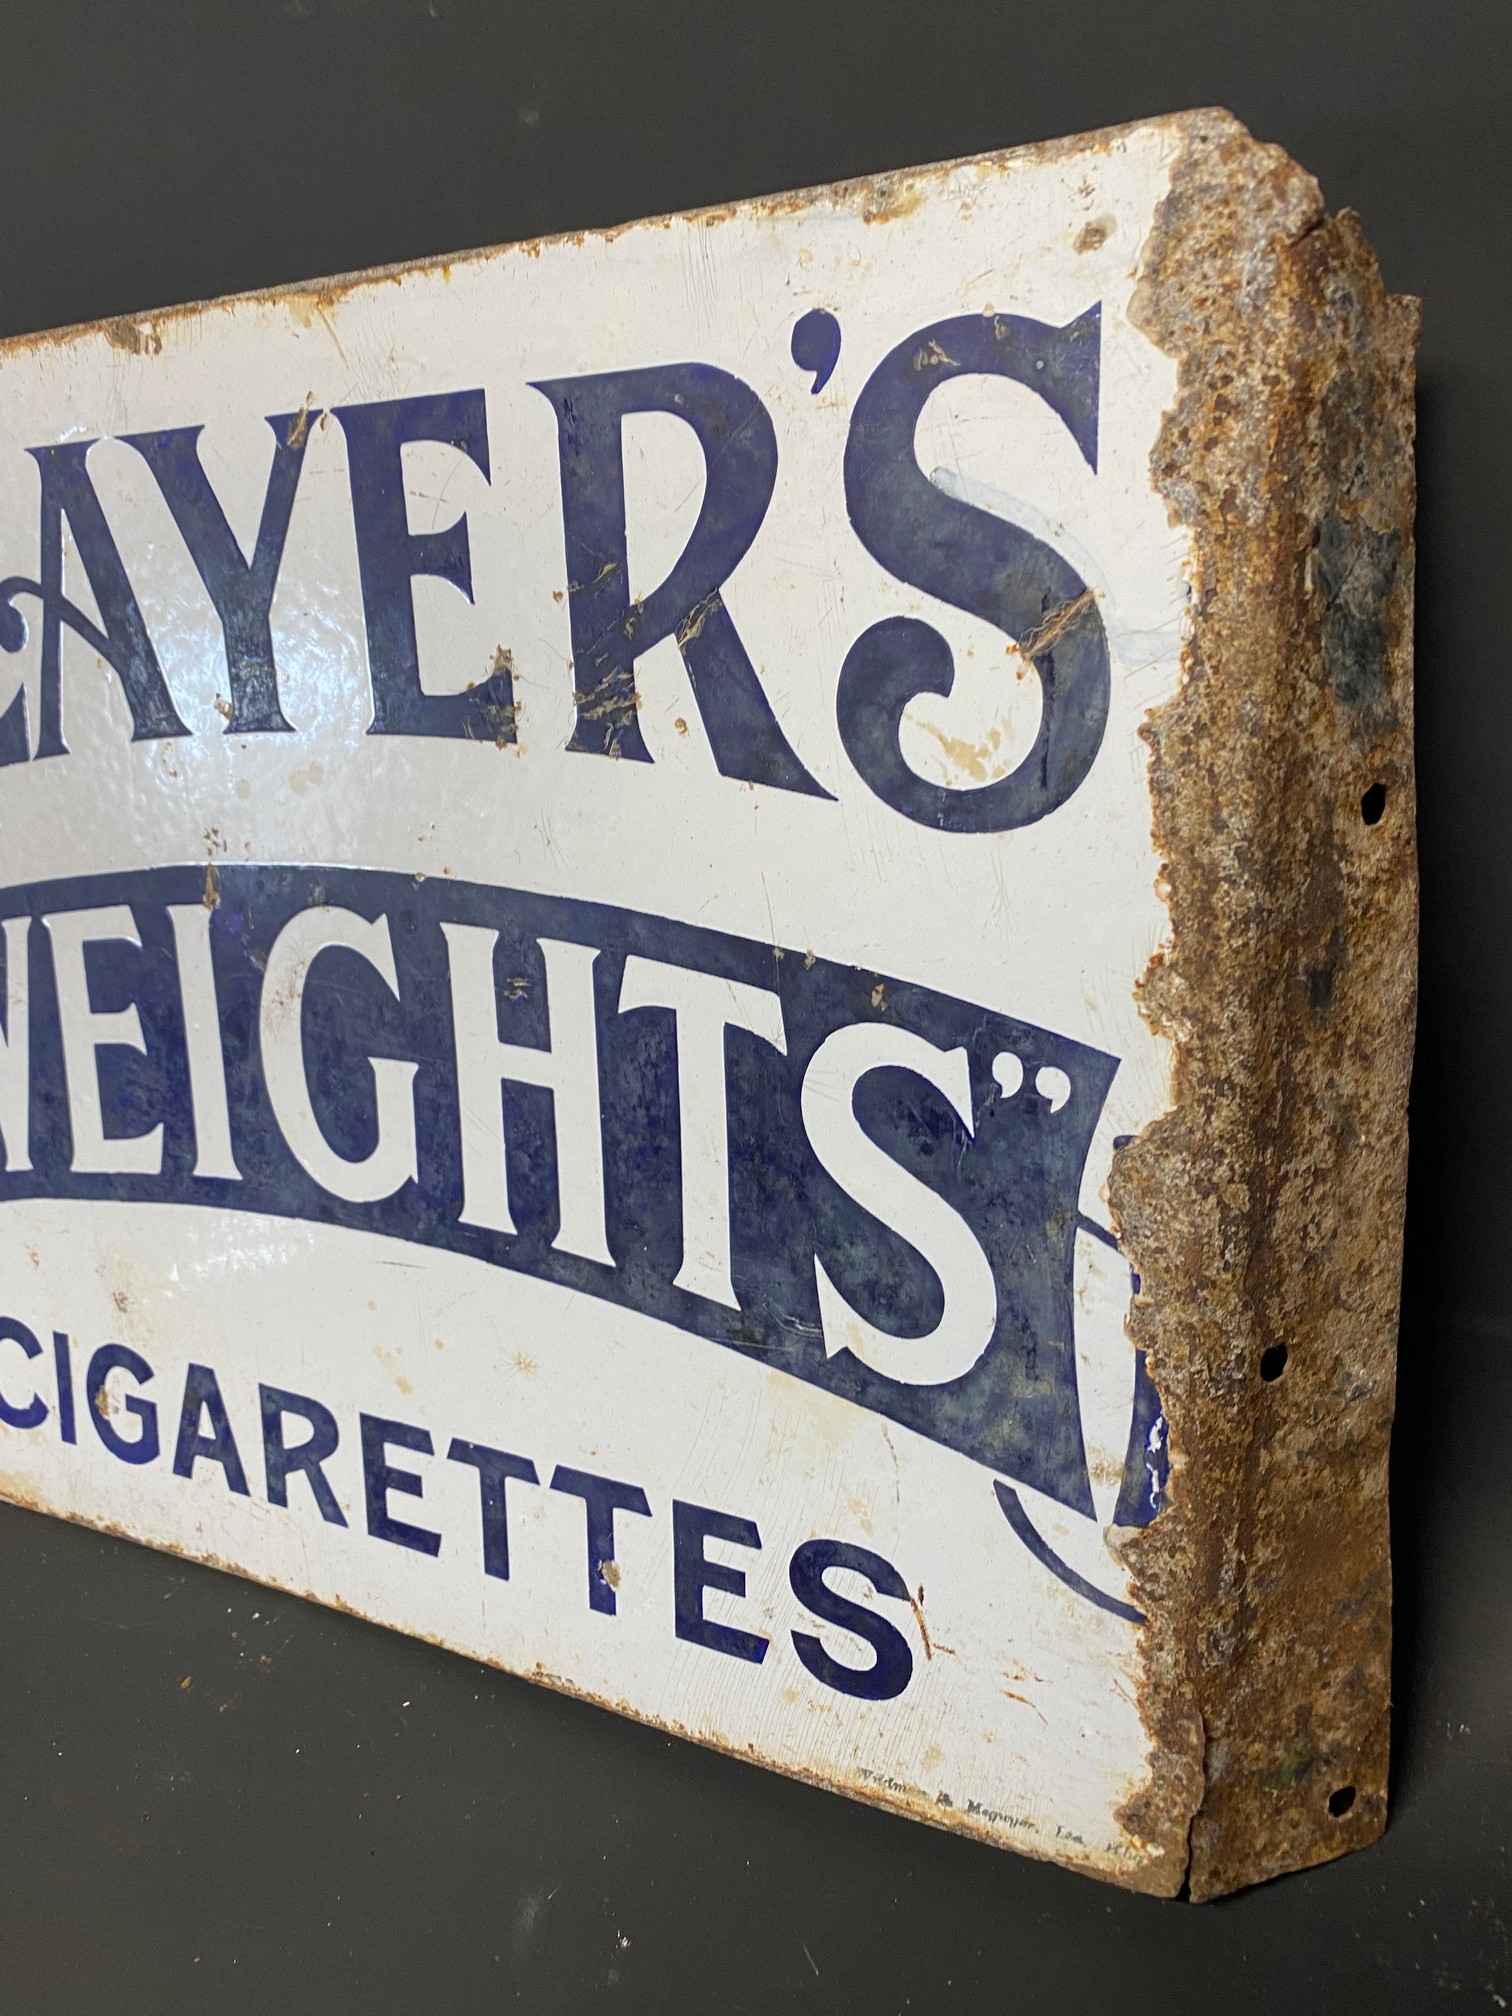 An early Player's Weights Cigarettes double sided enamel sign with hanging flange, by Wildman & - Image 6 of 6